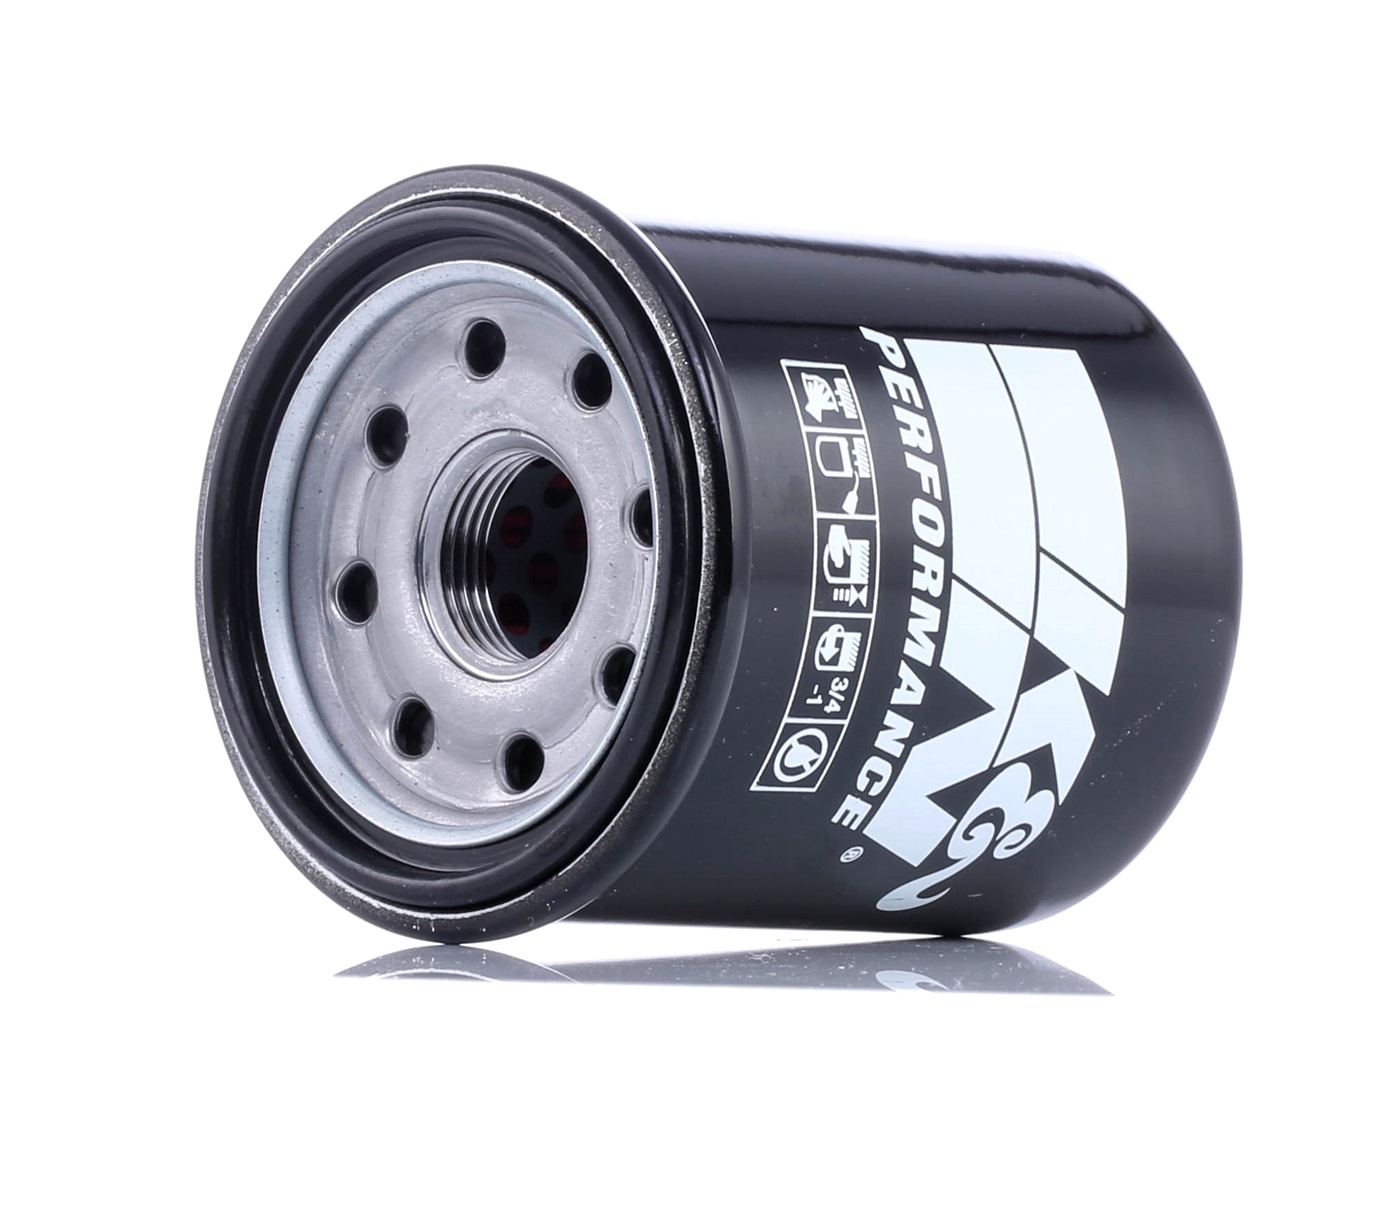 Filtre à huile K&N Filters KN-303 GTS Moto Mobylette Maxi scooter